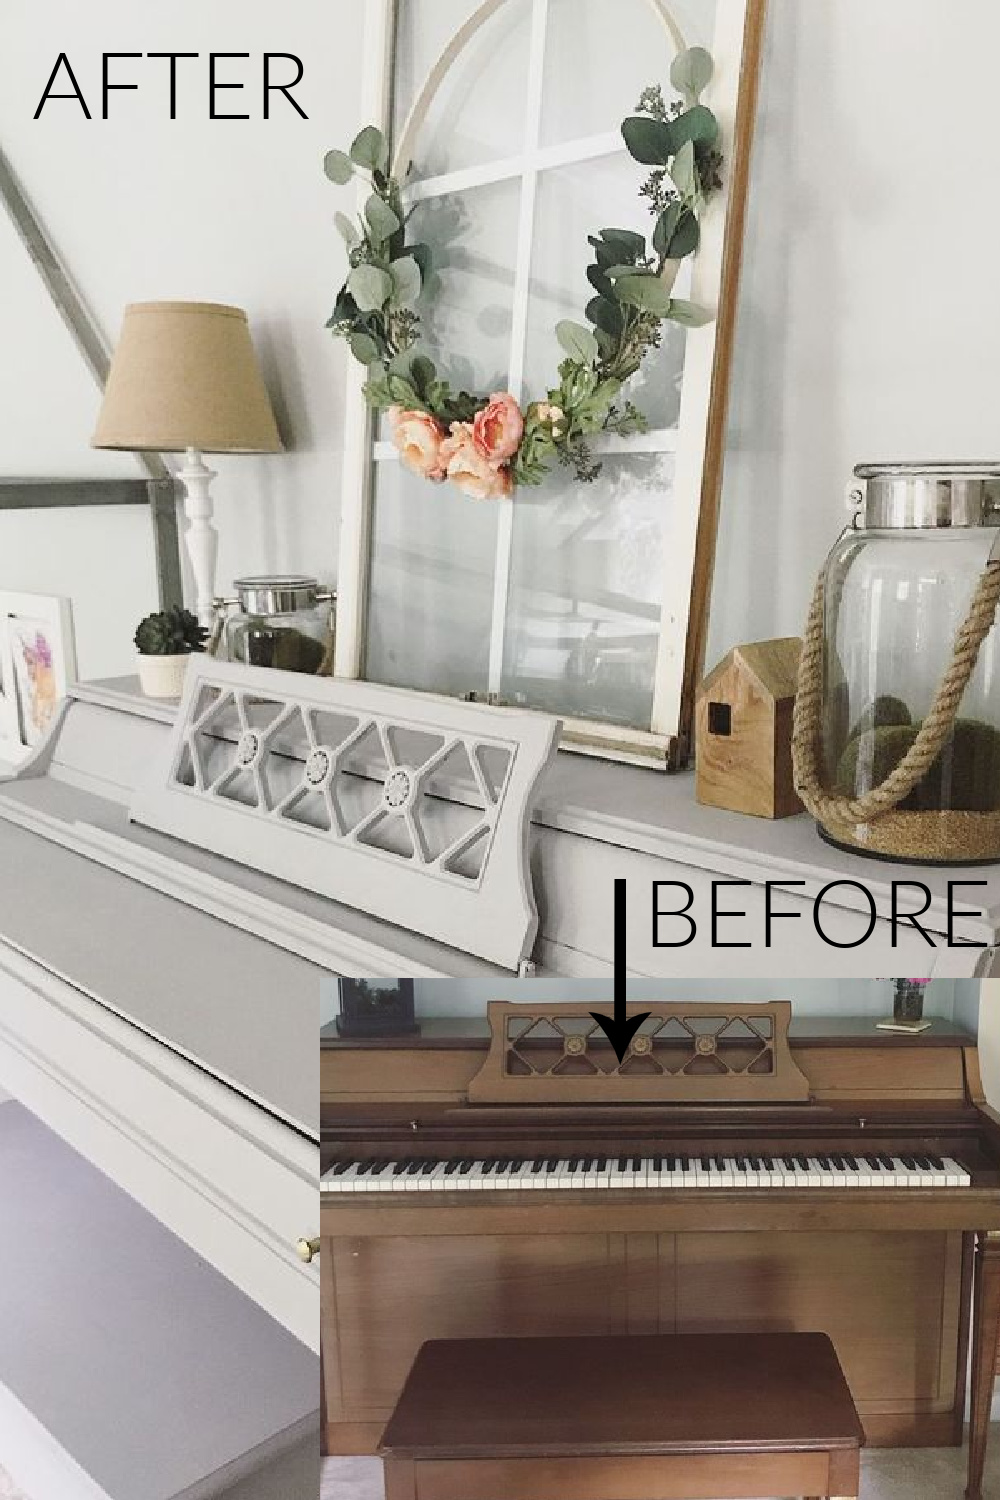 Rustoleum Aged Gray chalk paint transformed this upright piano beautifully - Emily Woods at Home. #rustoleumagedgray #chalkpaint #beforeafter #paintedpianos #paintcolors